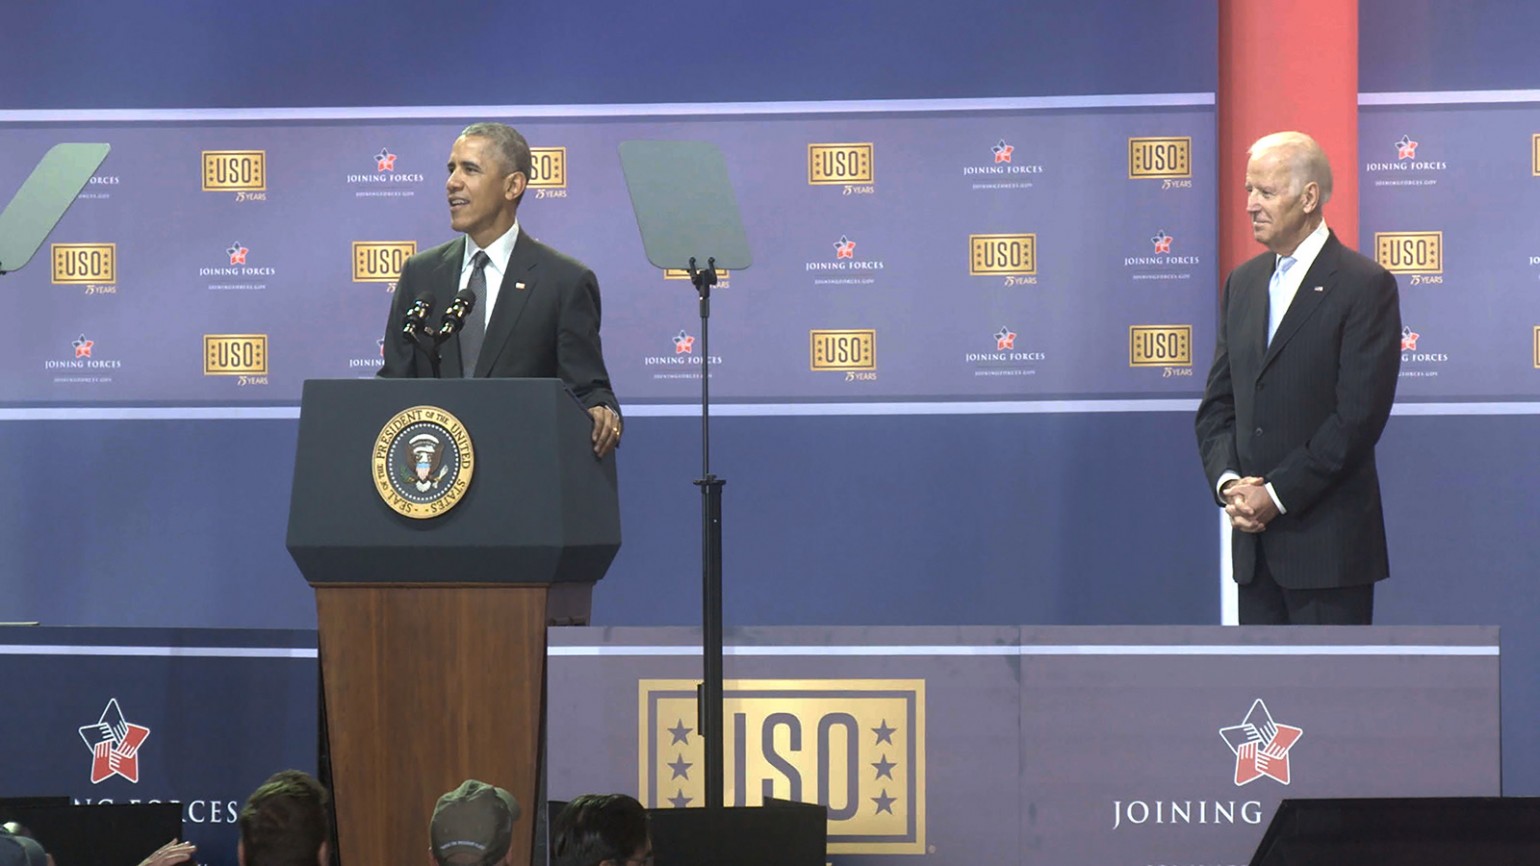 President Obama and Vice President Biden at an event celebrating 75 years of the USO.